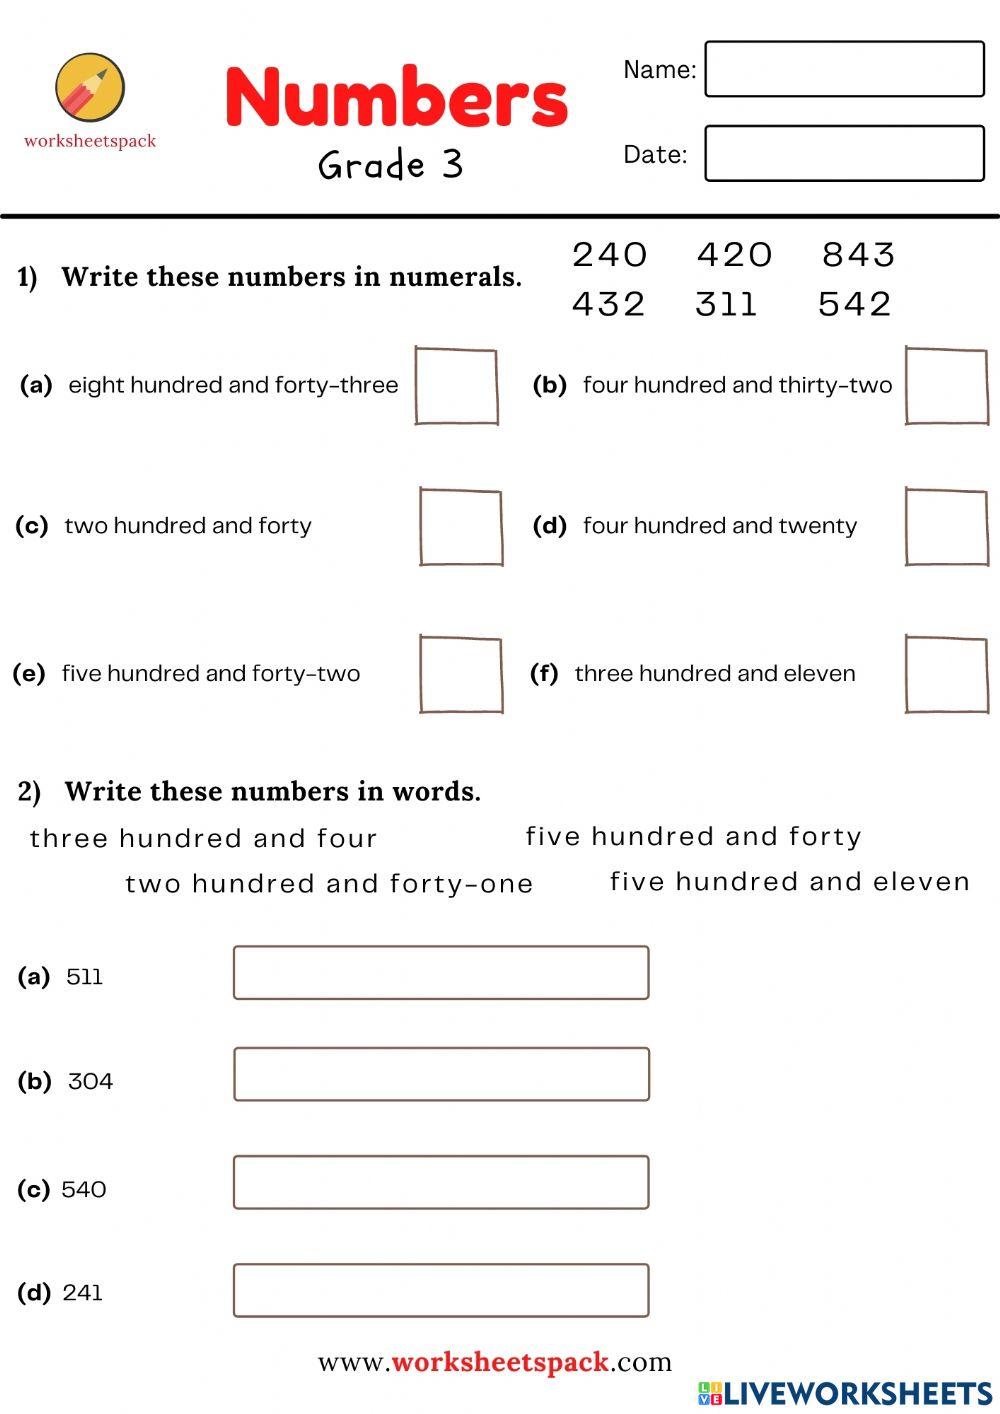 Numbers worksheet numerals and words